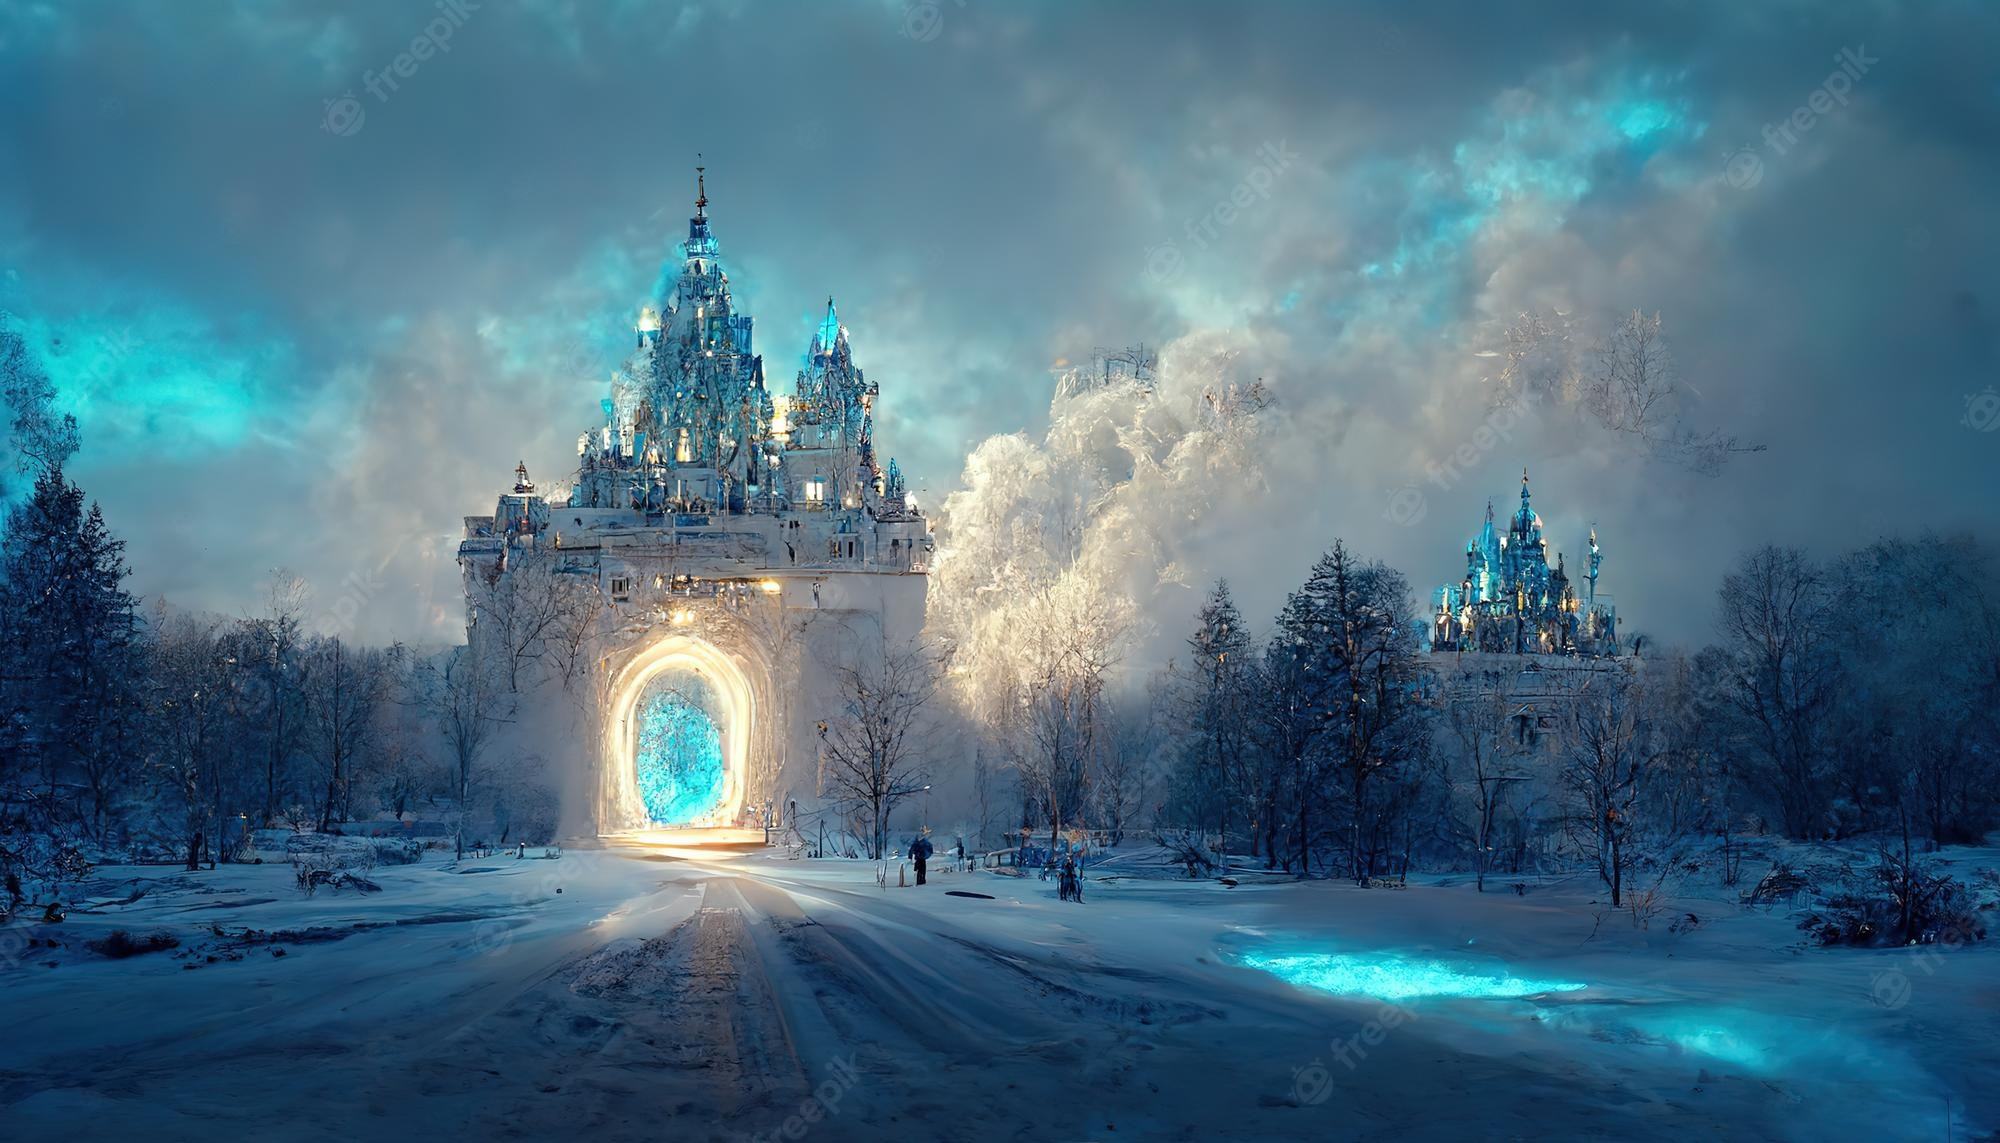 Premium Photo. Winter landscape with snow trees road and fantasy portal in the palace